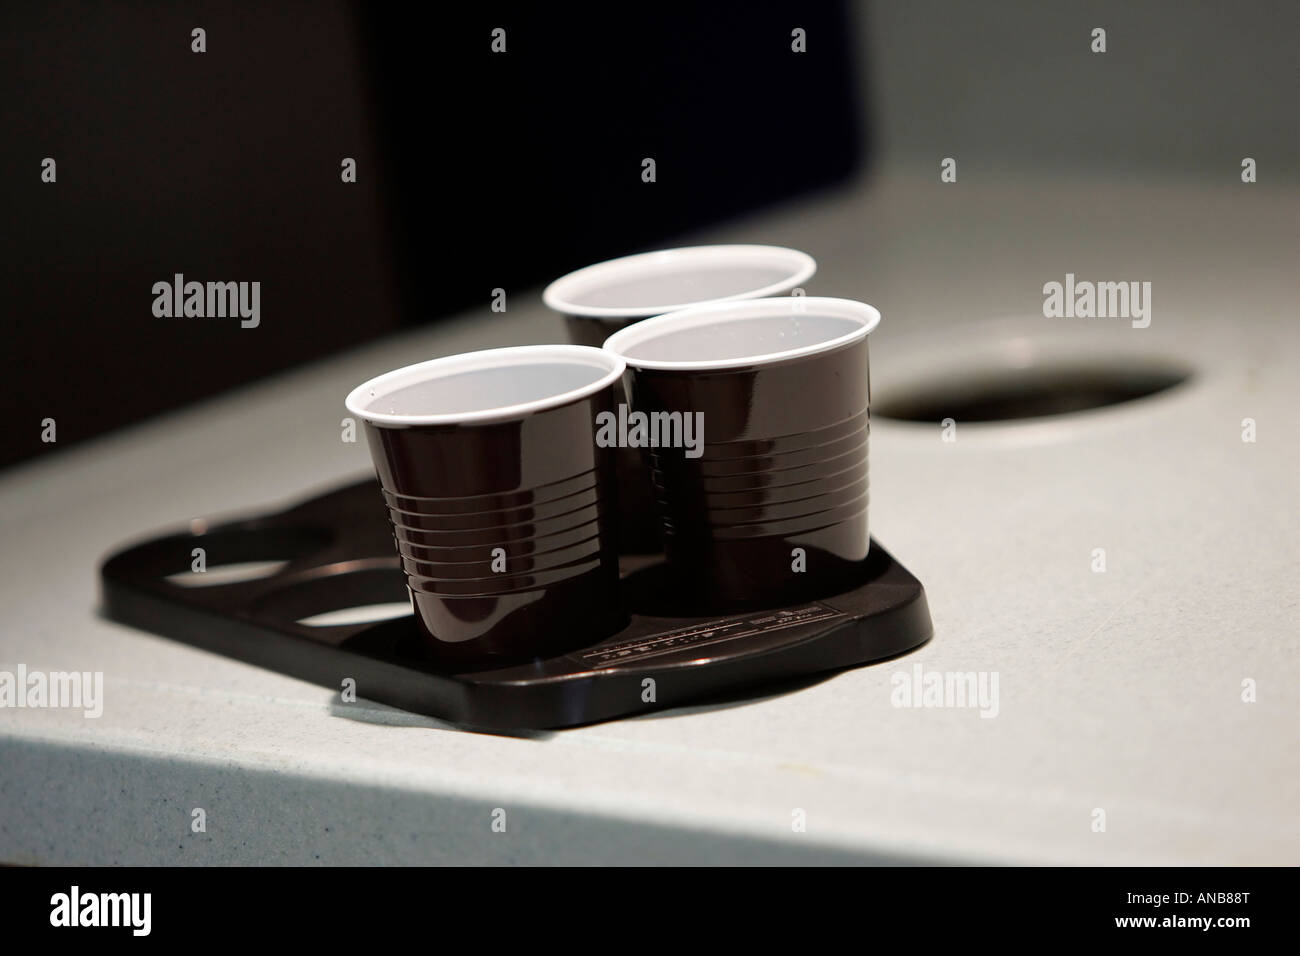 THREE DISPOSABLE CUPS AND TRAY IN AN OFFICE. Stock Photo